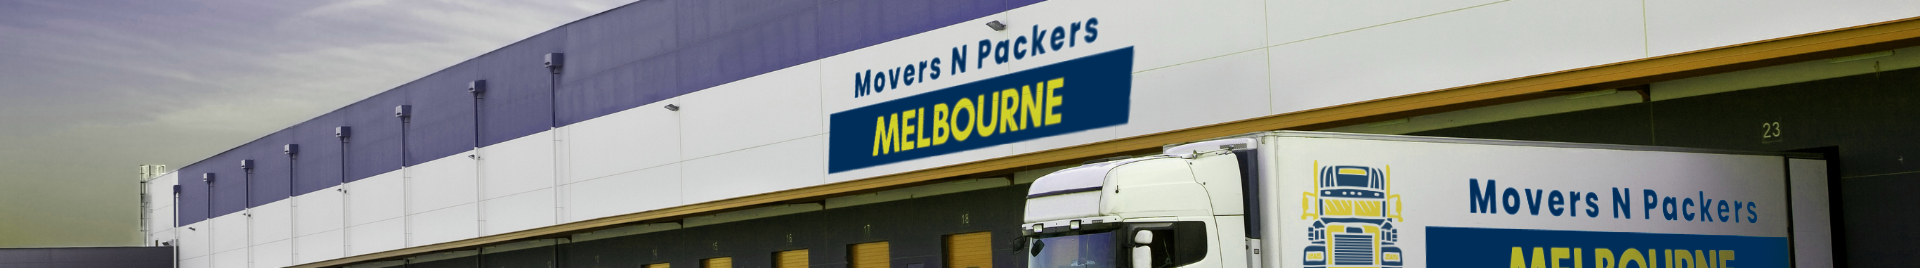 Movers N Packers Melbourne's profile banner